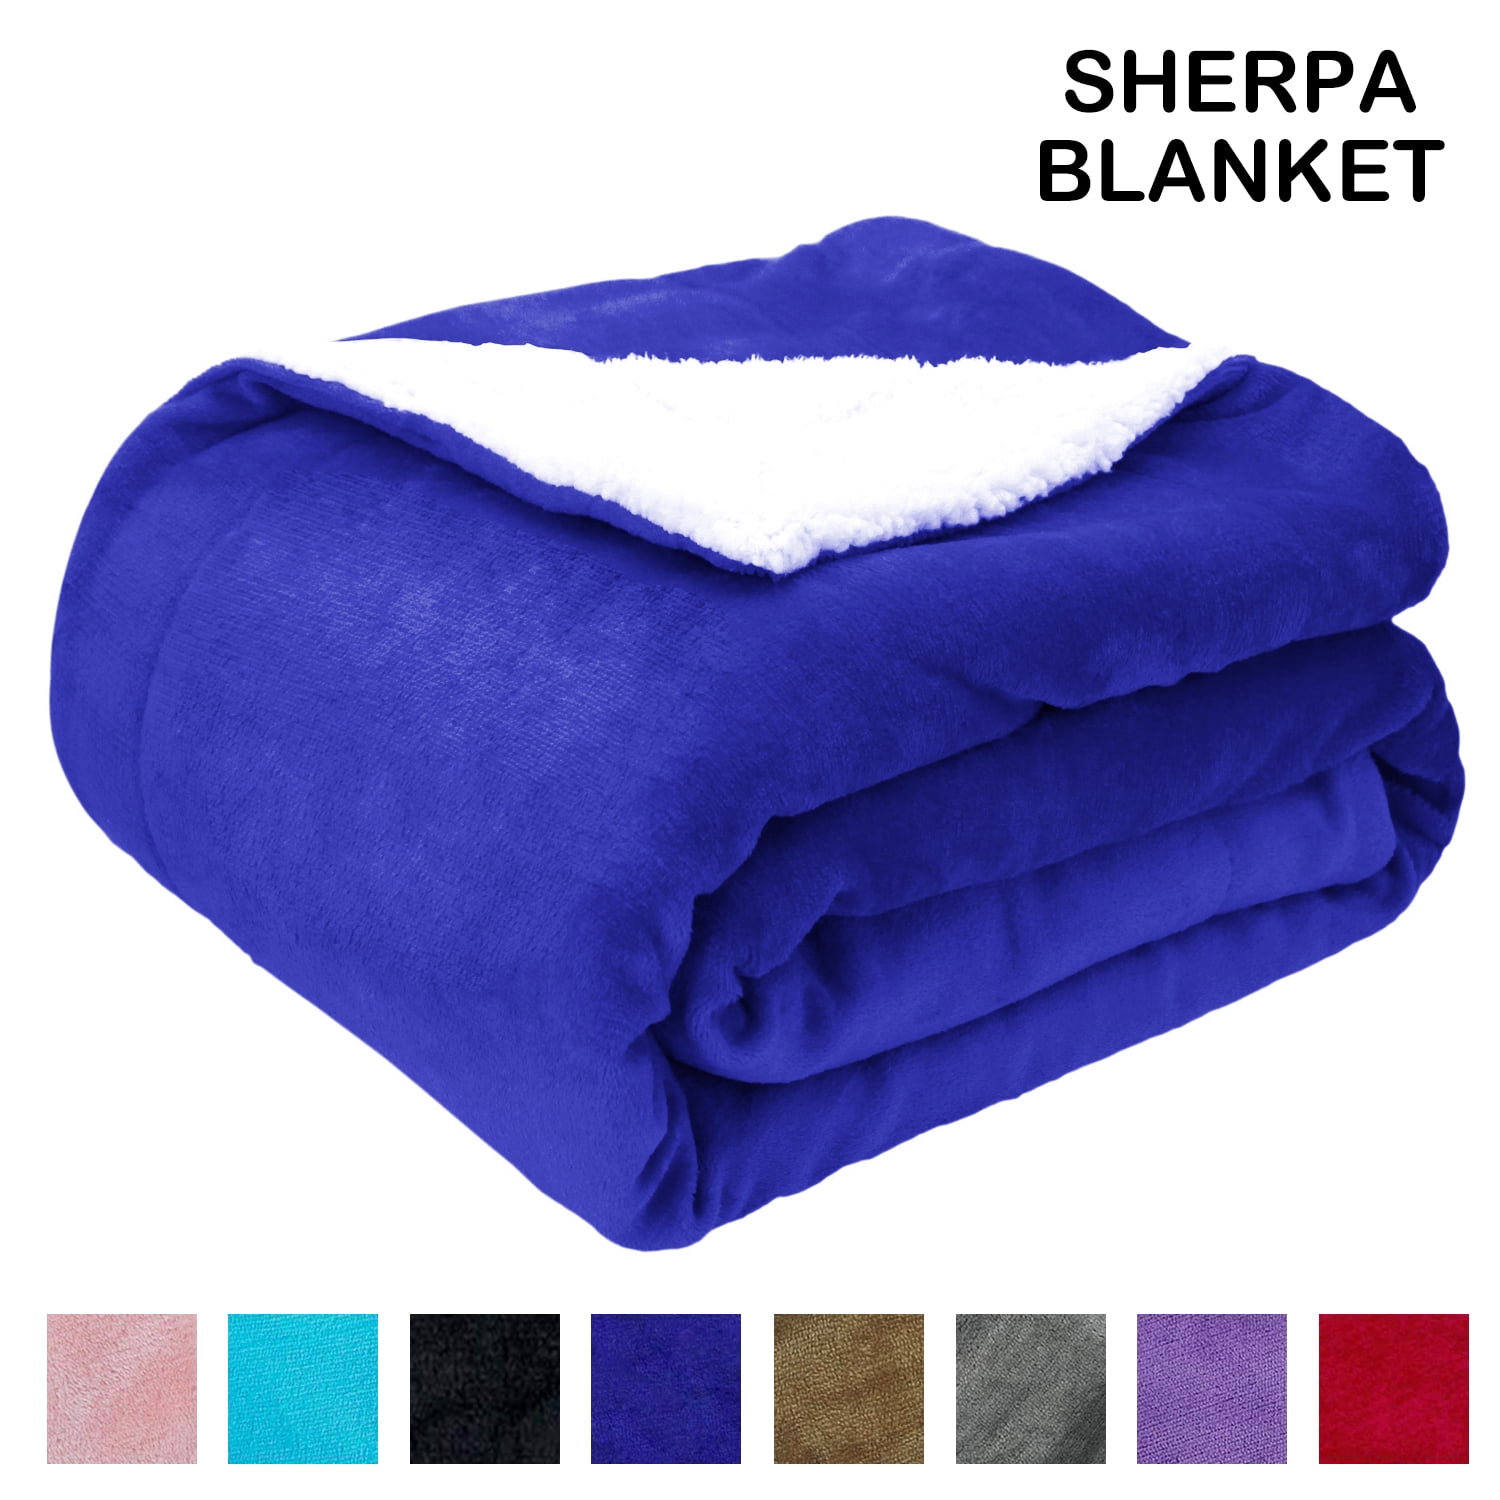 Red Blanket 50x61 Super Warm Sherpa Blanket Fuzzy Thick Fleece Blankets  for All Season Extra Soft for Bed Couch